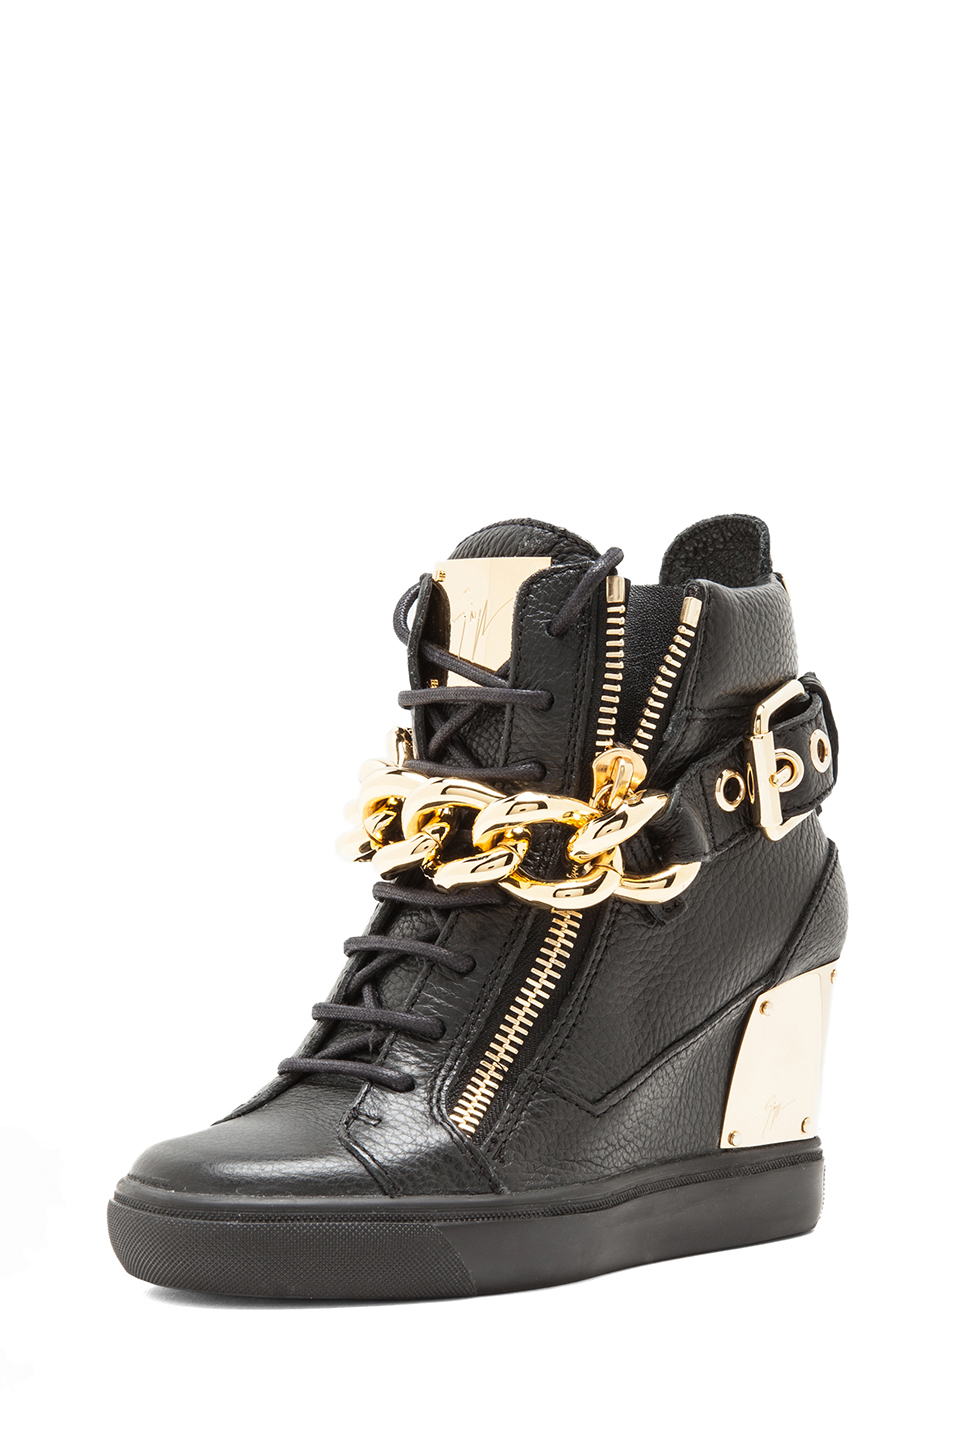 Lyst - Giuseppe Zanotti Lorenz Grained Leather Wedge Sneakers with ...